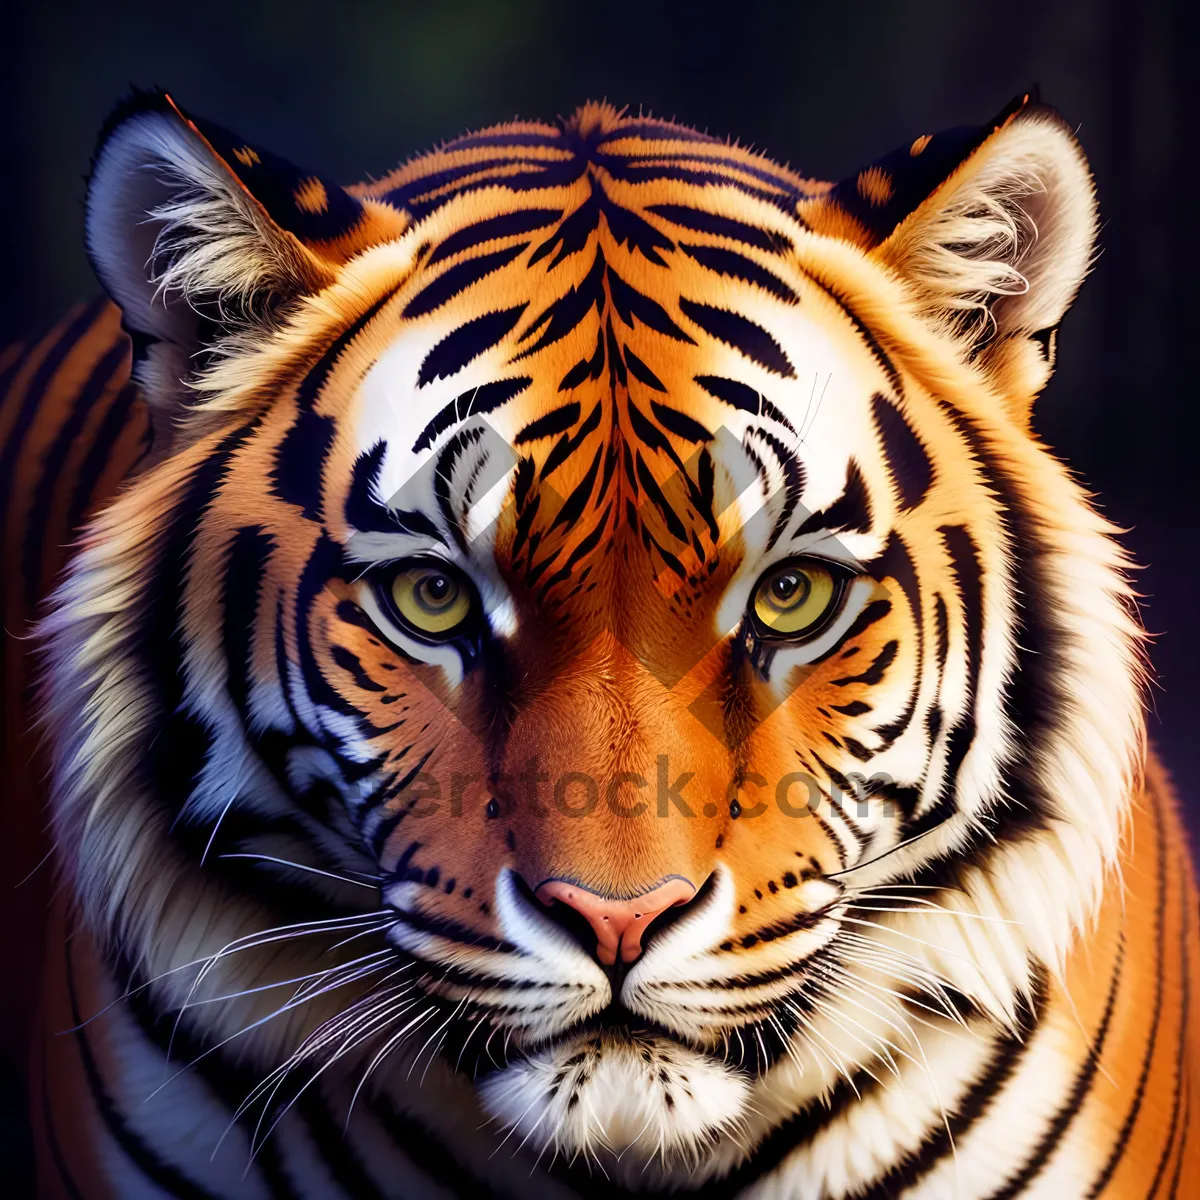 Picture of Majestic Tiger: The King of the Jungle